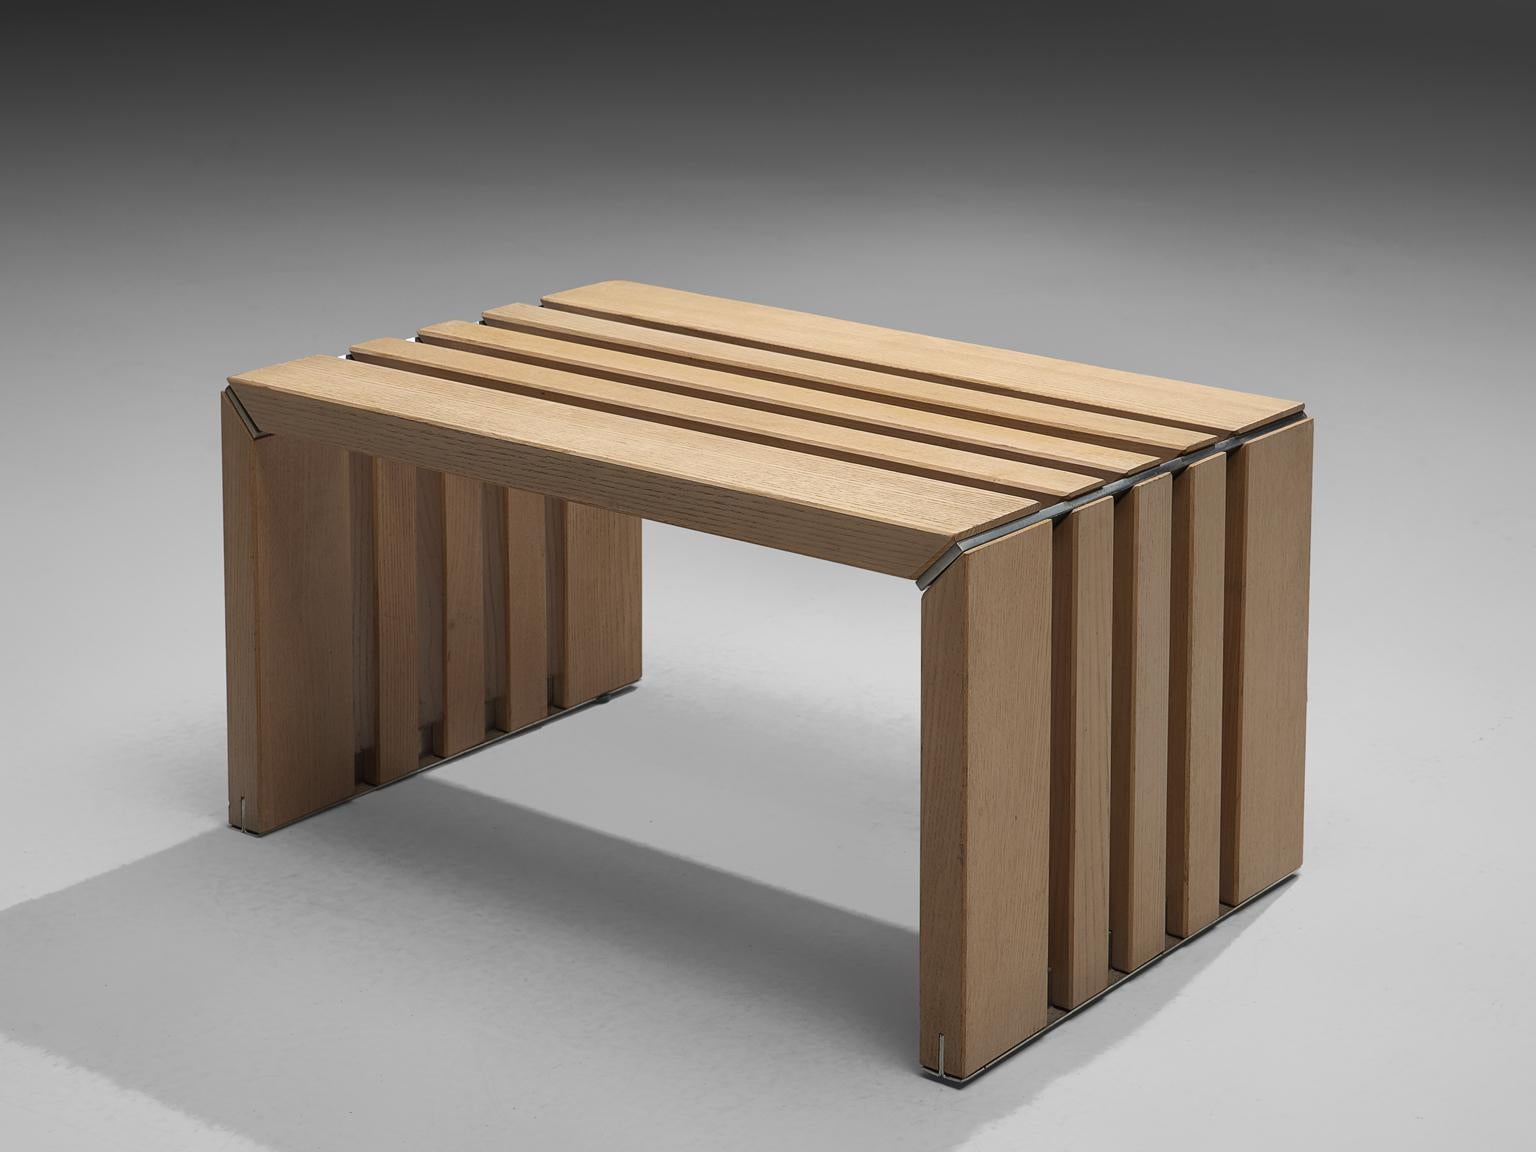 Walter Antonis for 't Spectrum, stool, in ash and metal, the Netherlands, circa 1974.

Slat stool in white-wash ahs with metal elements from the Passe-Partout series designed bu Walter Antonis for 't Spectrum. This small bench has a modest design.